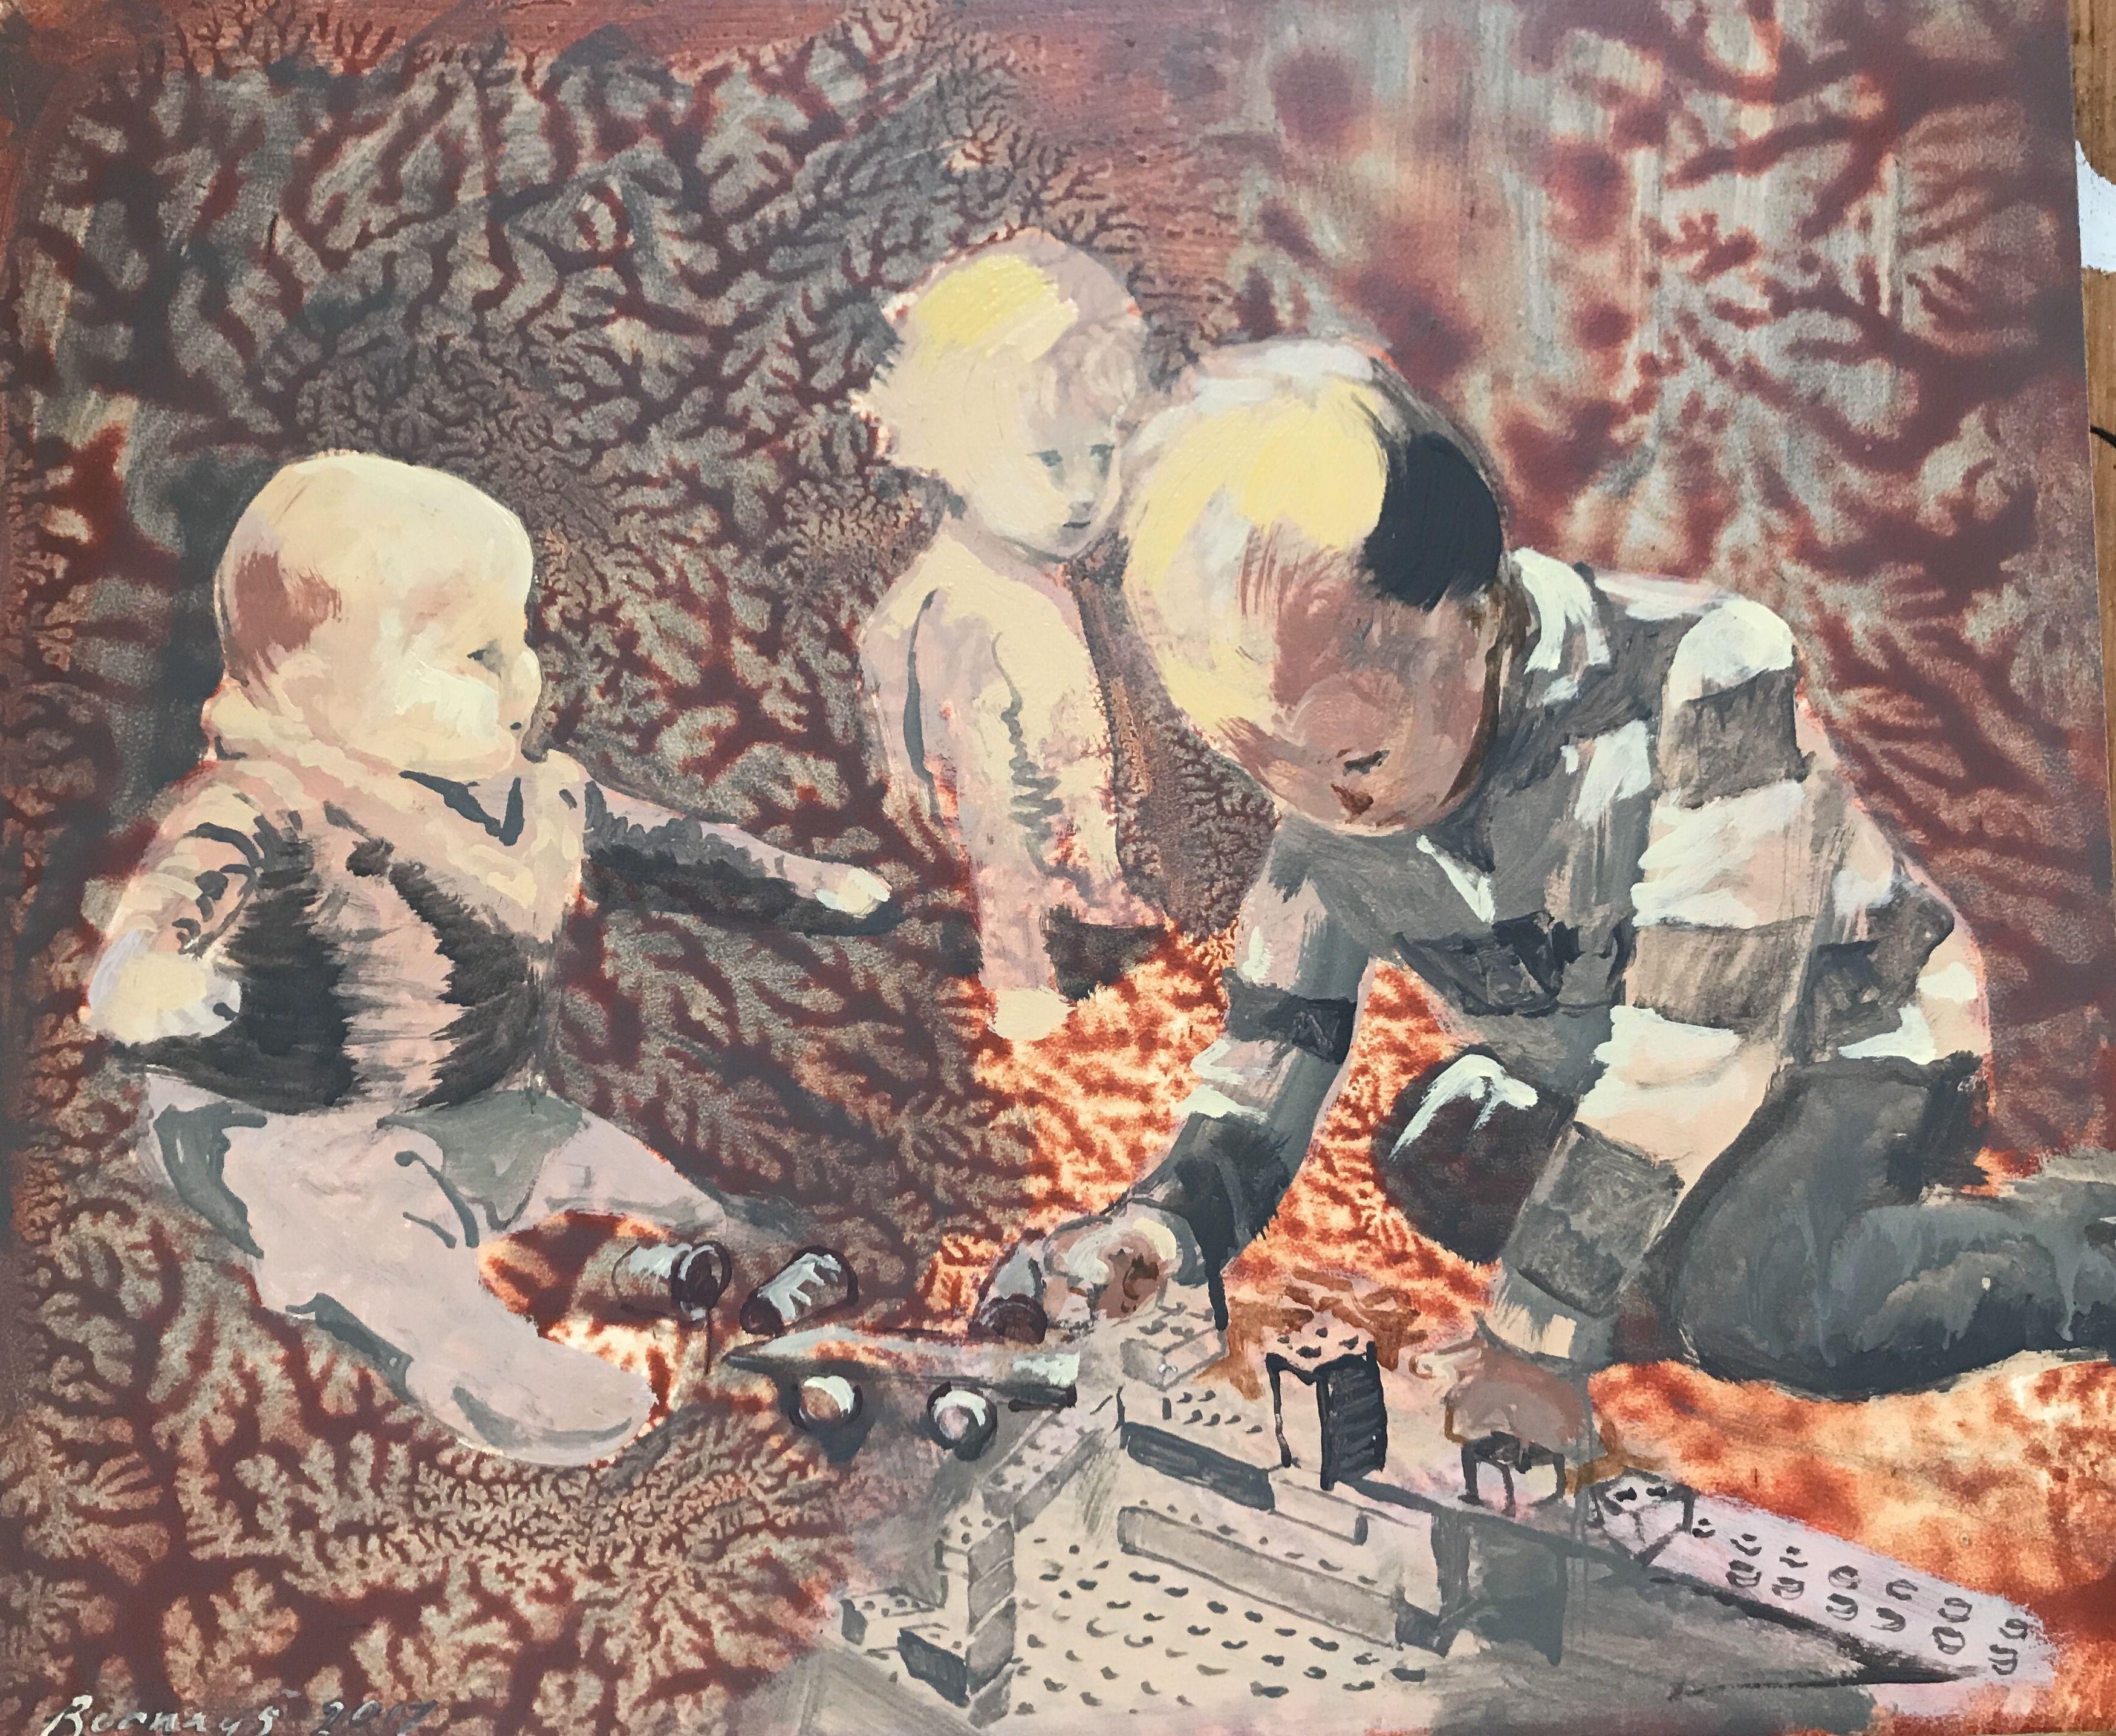 I had this board, with the orange pattern, for ages in my studio. It is the perfect cerebral context for this portrait of siblings. I love the relationships. The composition so wonderfully illustrates their birth order. The adoring gaze on the